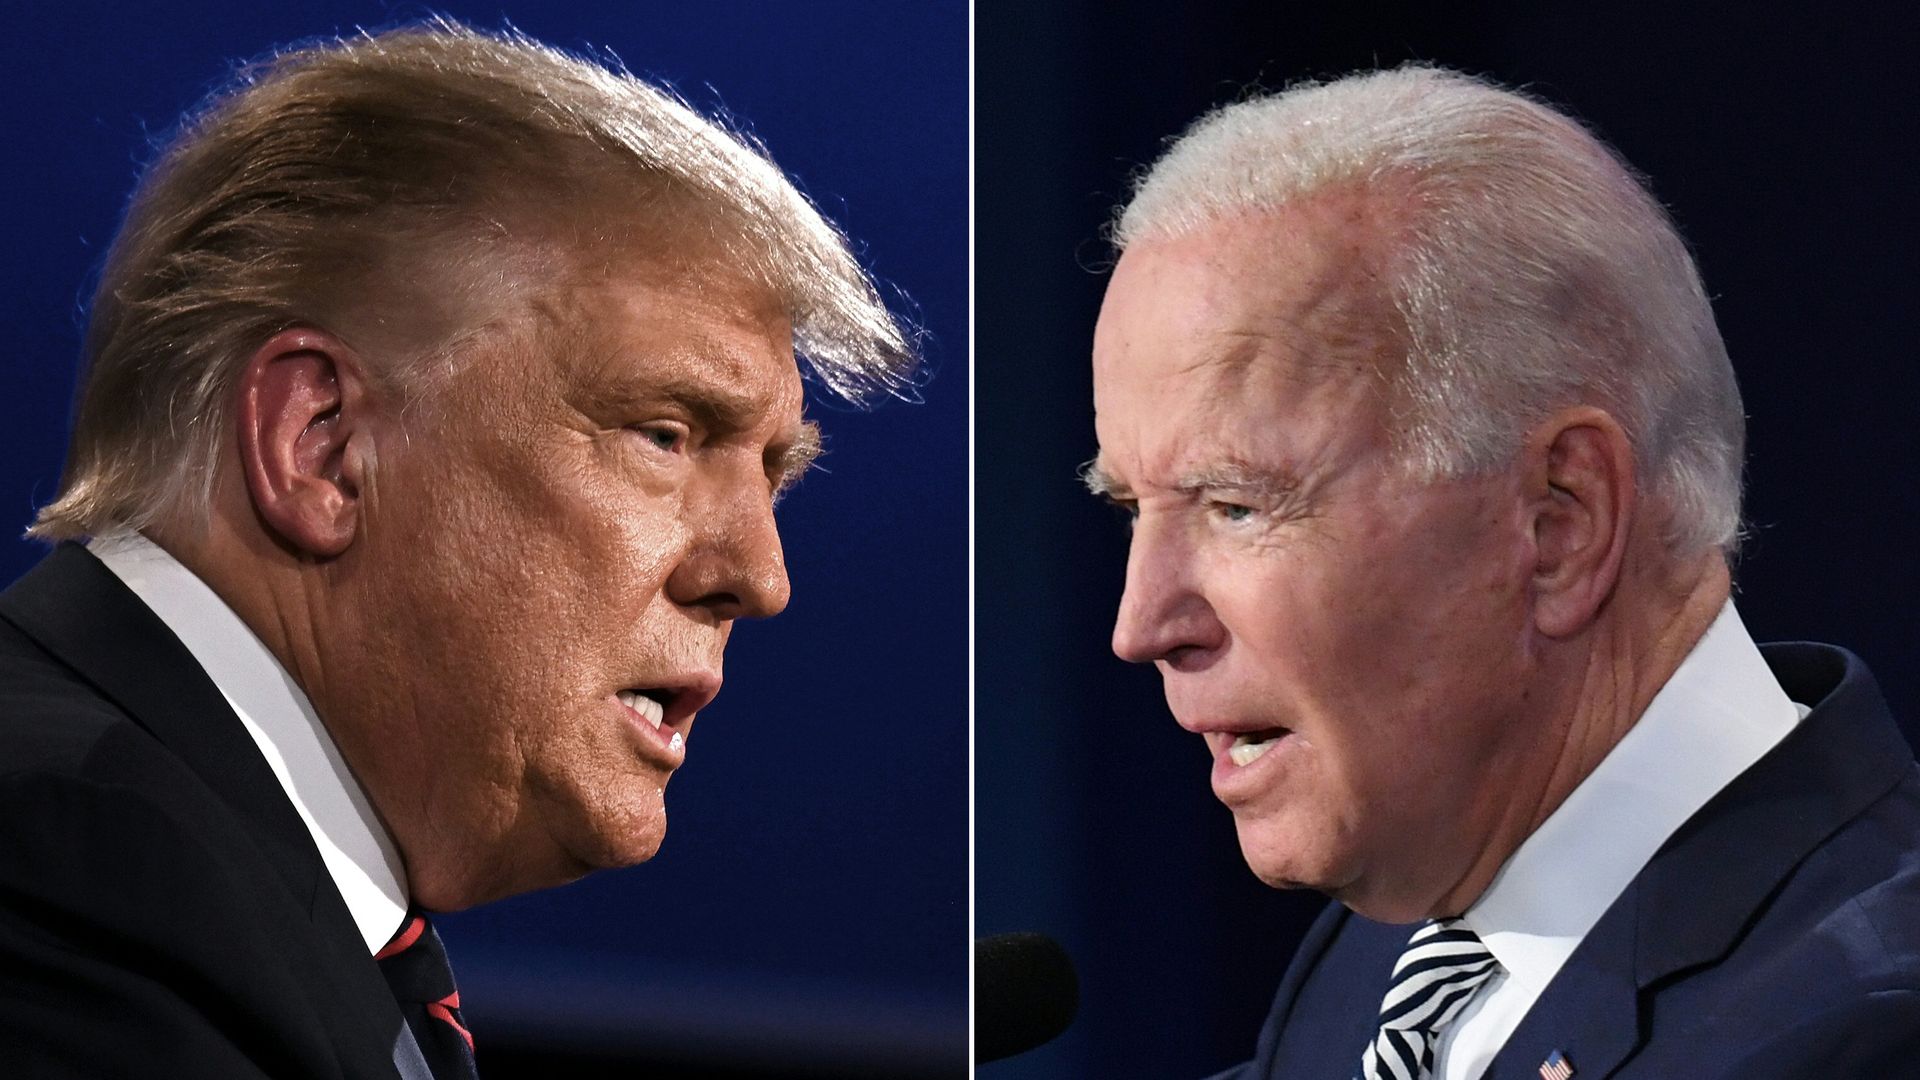  September combination of pictures of then-President Trump (L) and then-Democratic Presidential candidate Biden during the first presidential debate in Cleveland, Ohio on September 29. 